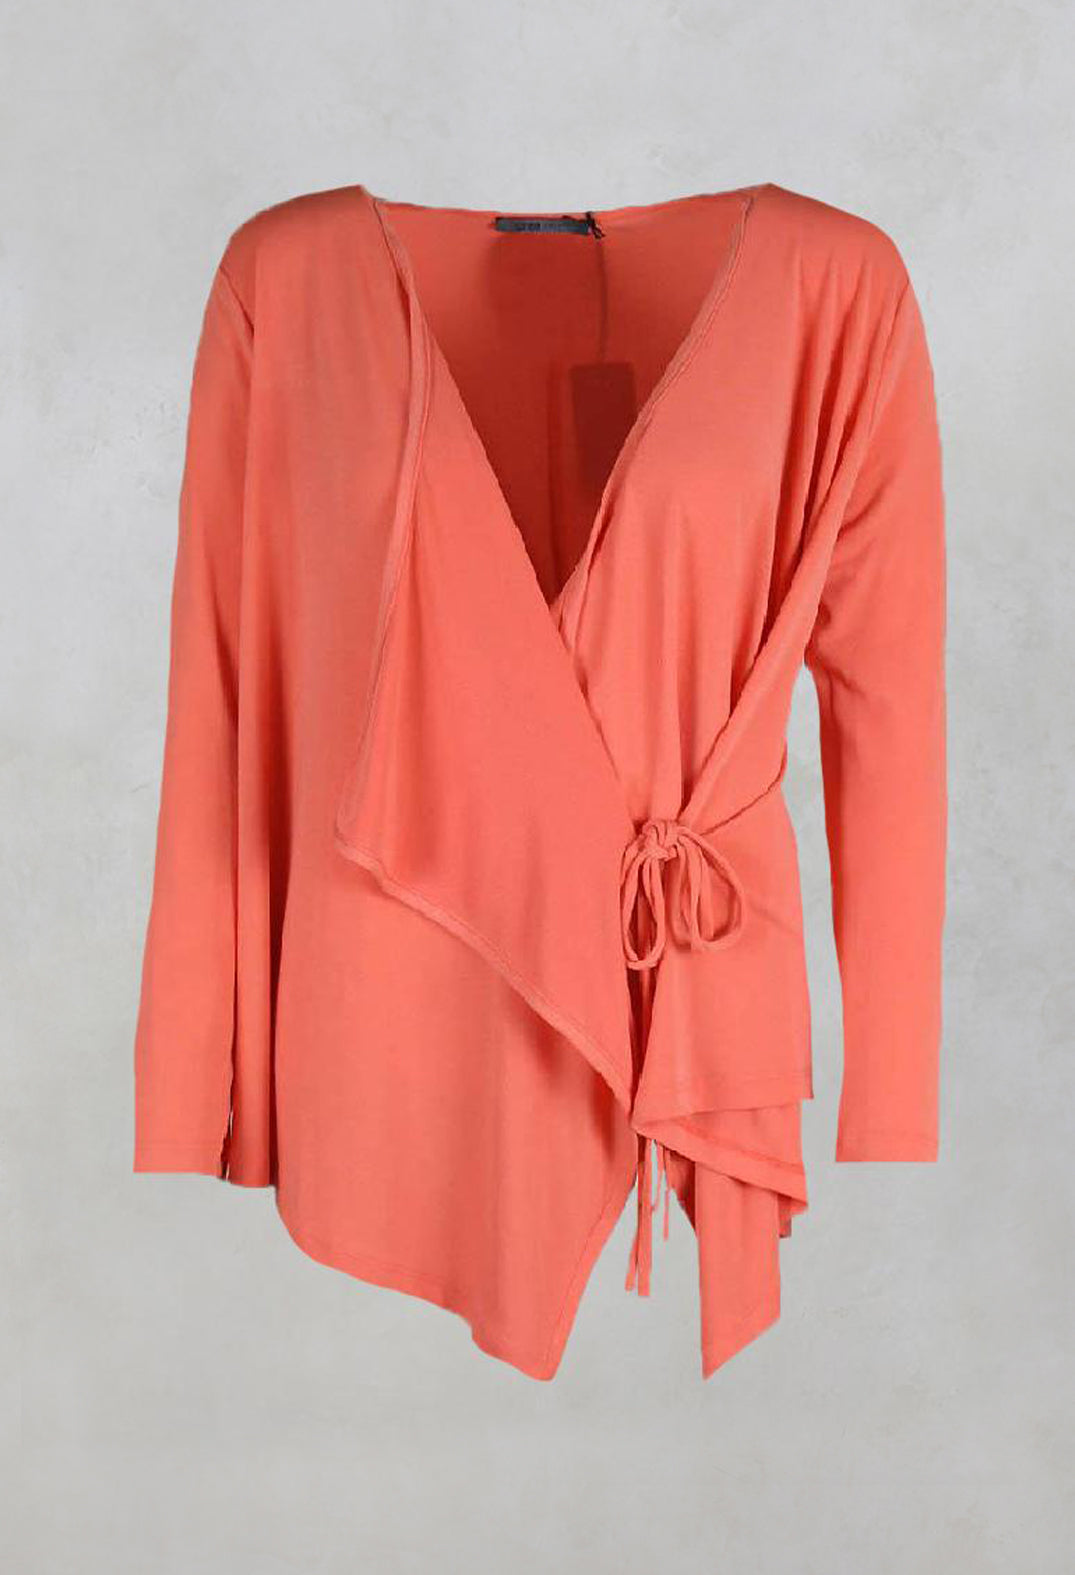 Draped Tie Jacket in Coral